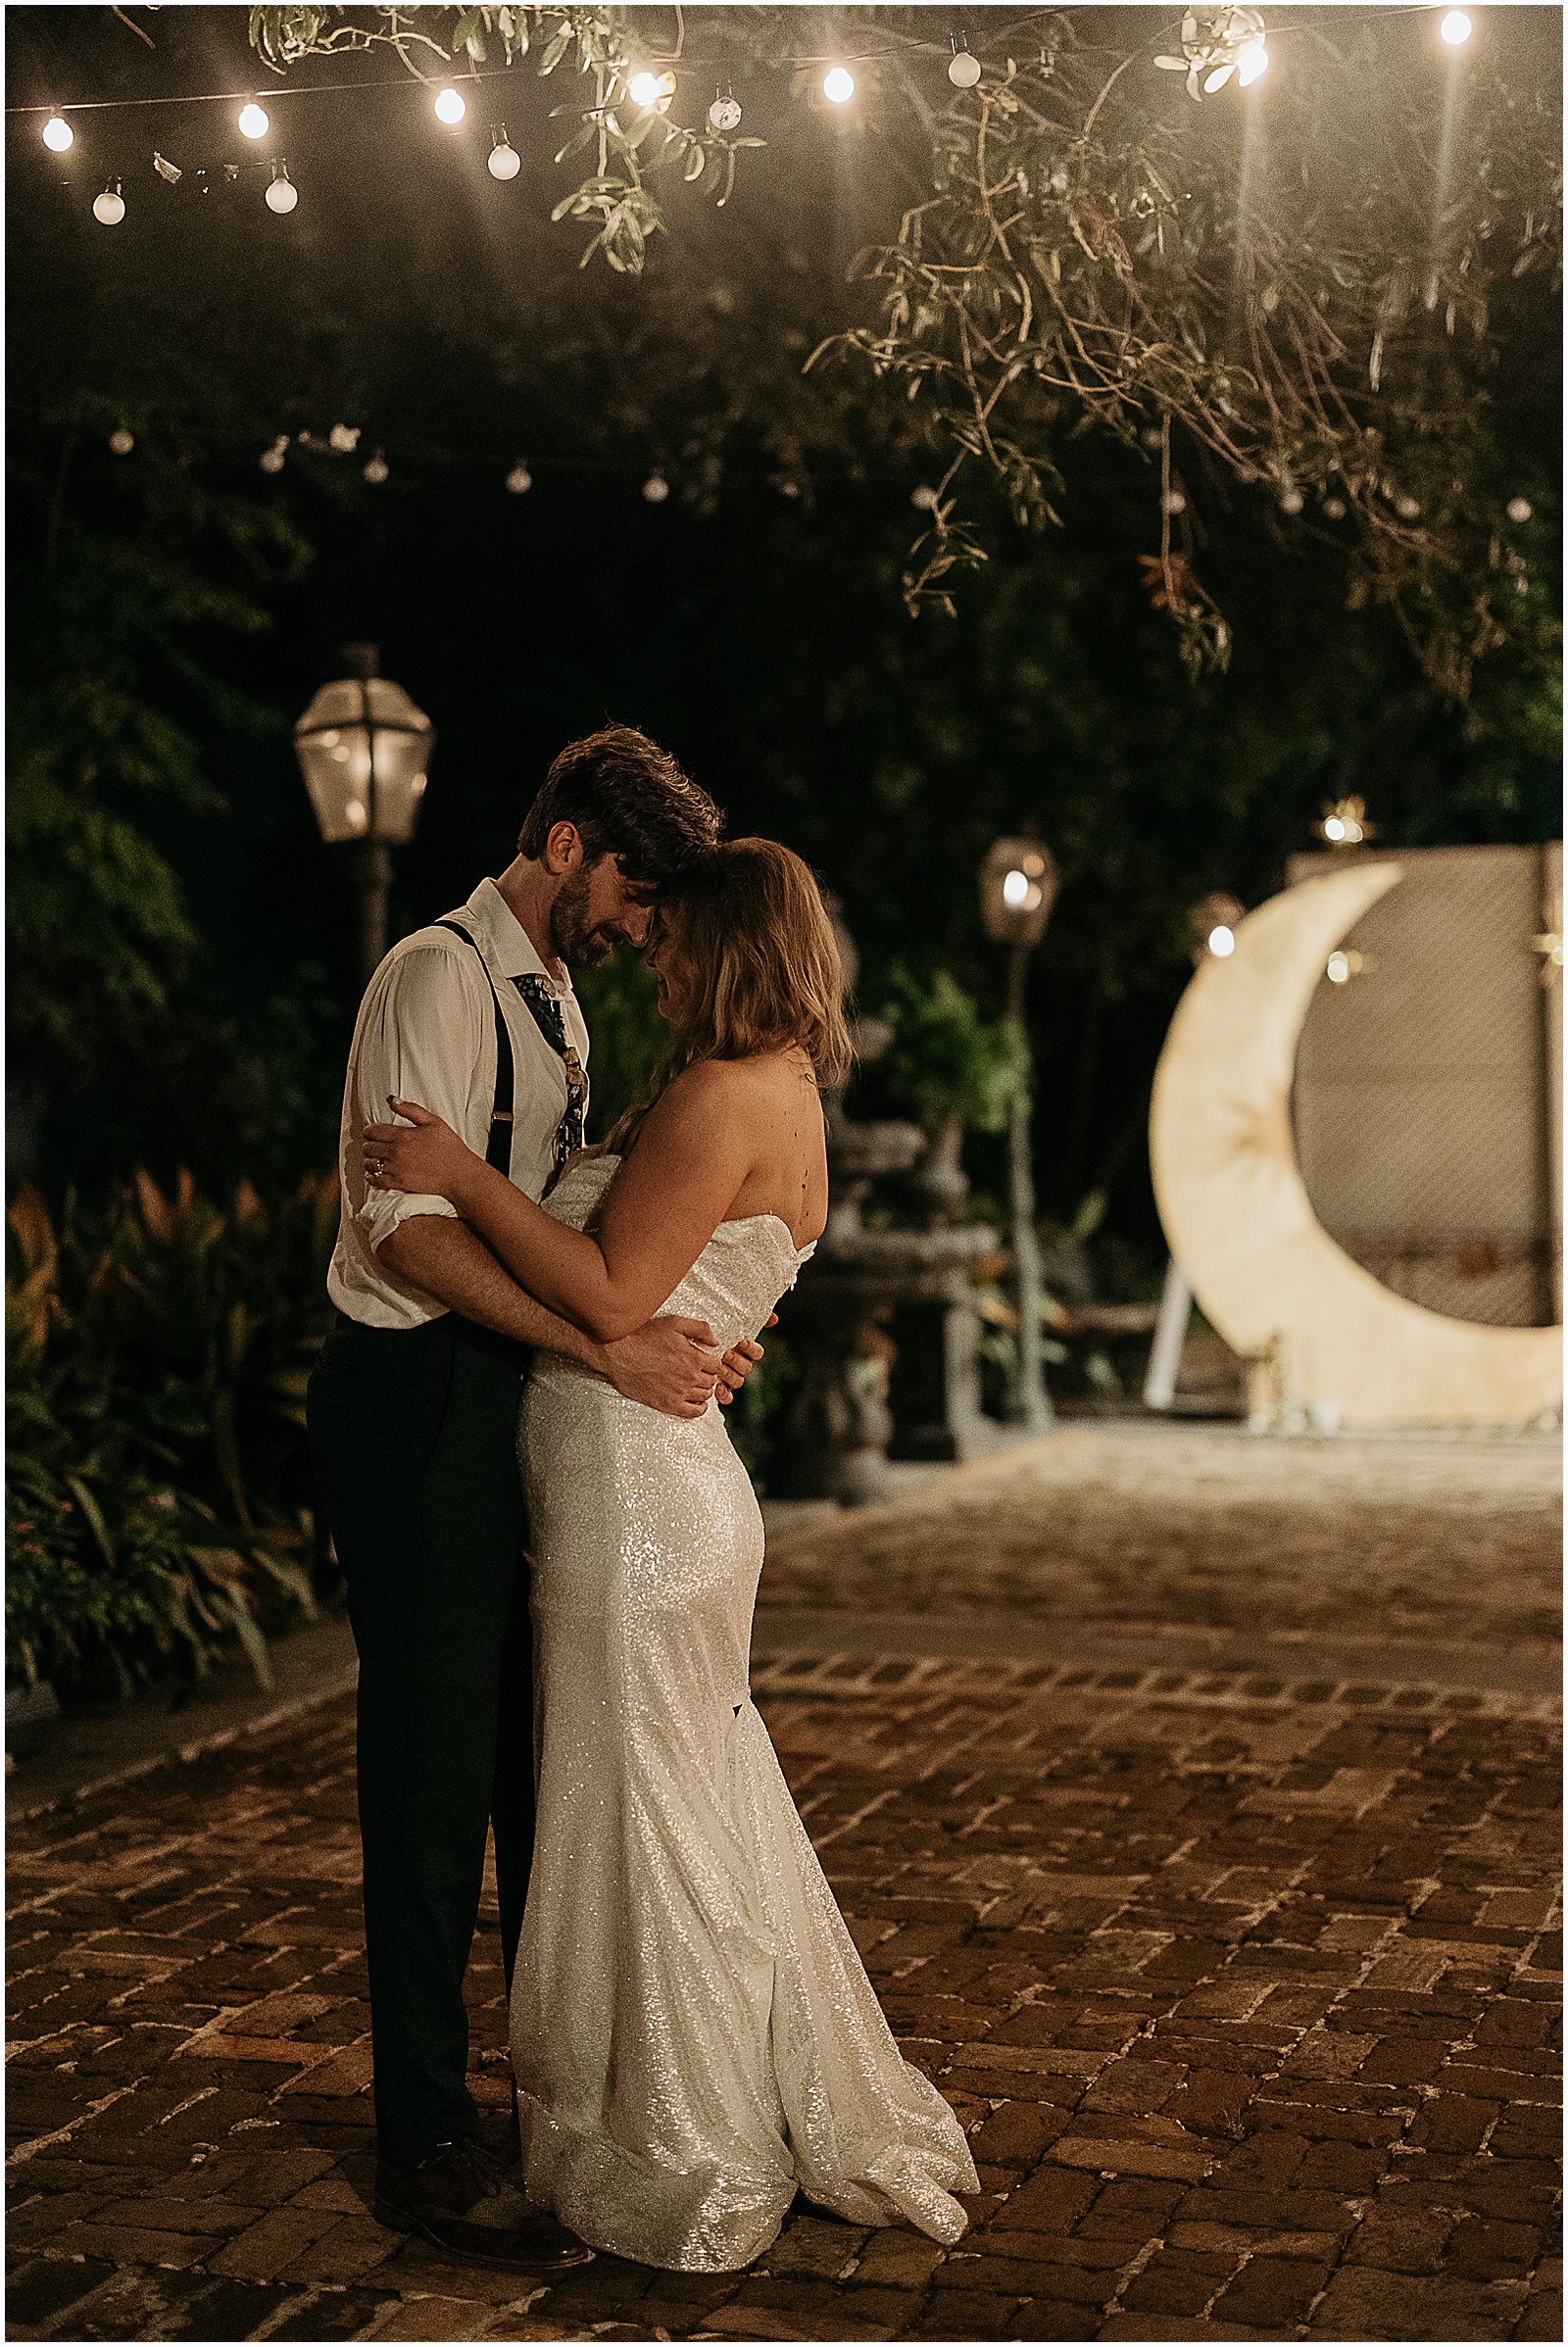 A bride and groom dance at night in the courtyard of a New Orleans wedding venue.